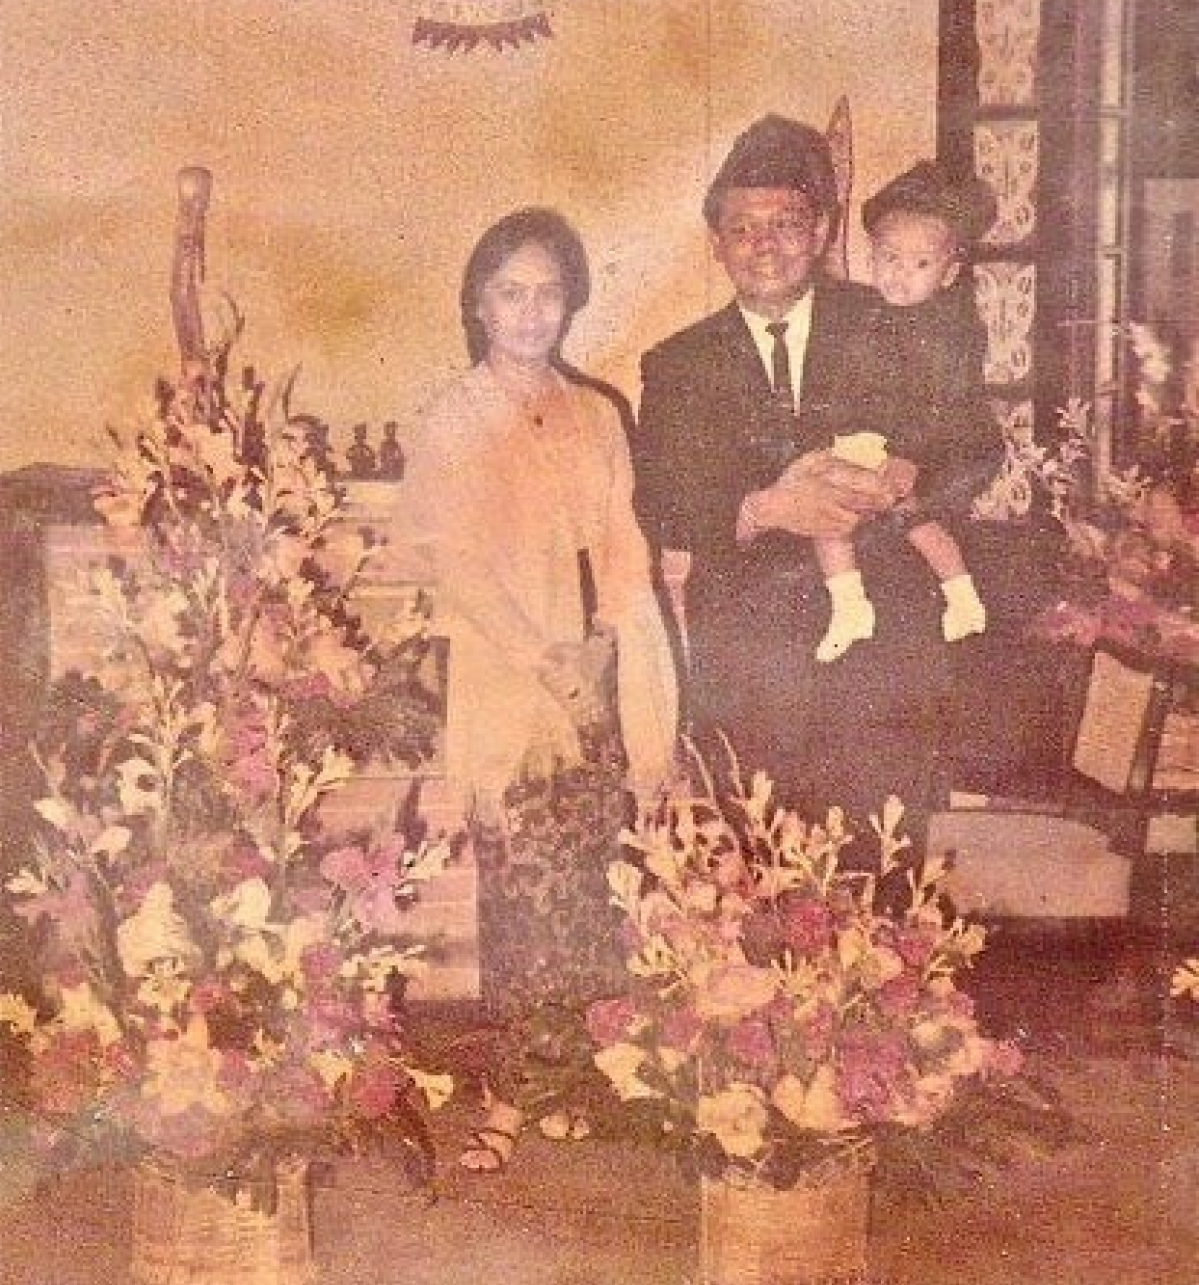 A former Indonesian diplomatic's lady shares memory of life during the Vietnam War